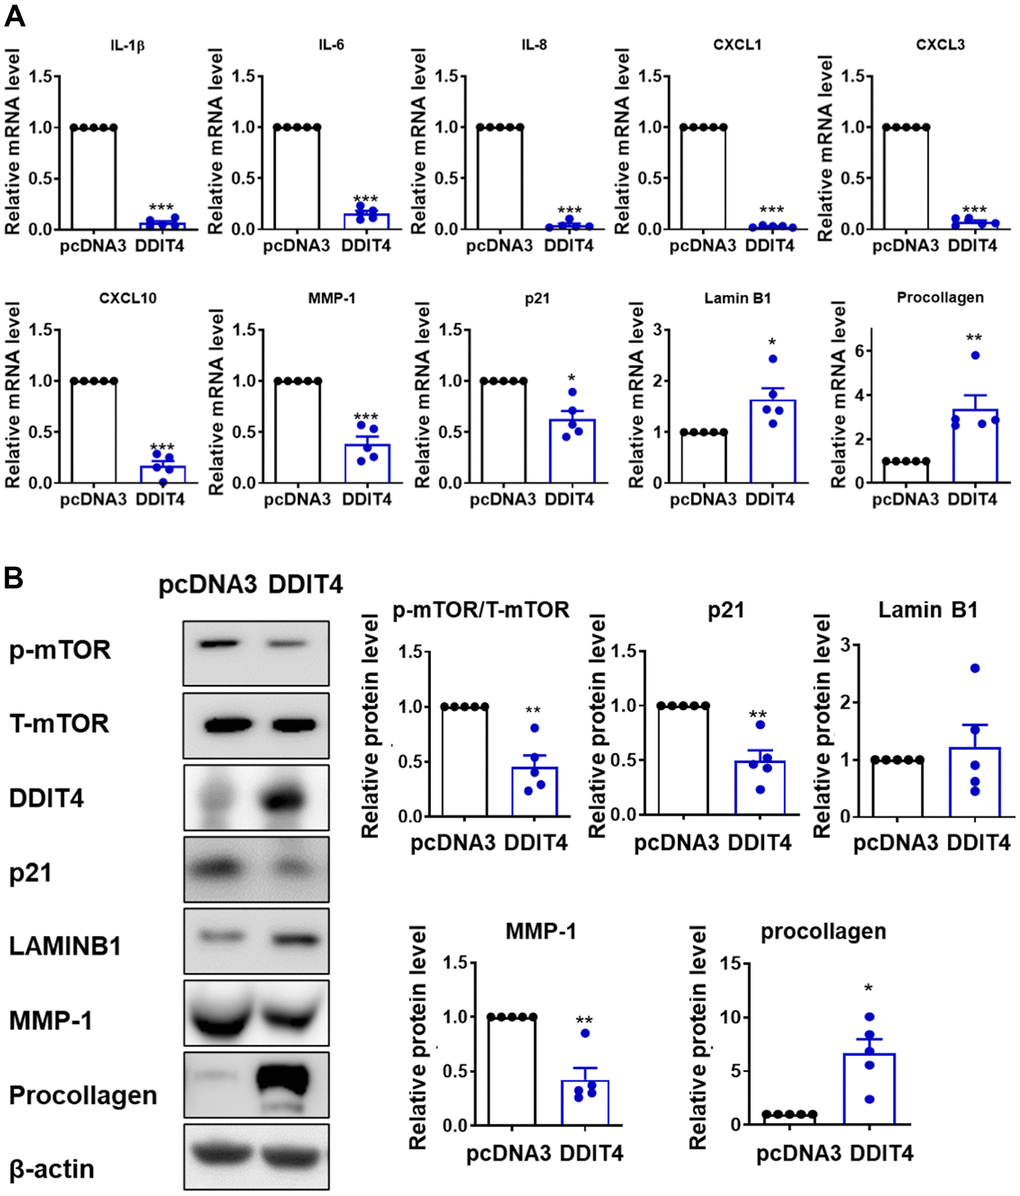 DDIT4 regulates the expression of SASP and age-associated genes. (A) The mRNA levels of senescence-associated secretory phenotype (SASP) and aging-related genes were determined by quantitative real-time PCR. (B) After DDIT4 overexpression, the protein levels of aging-related genes were examined using western blot analysis. Beta-actin served as a loading control. Data represent the mean ± SE (n = 5, ** P 